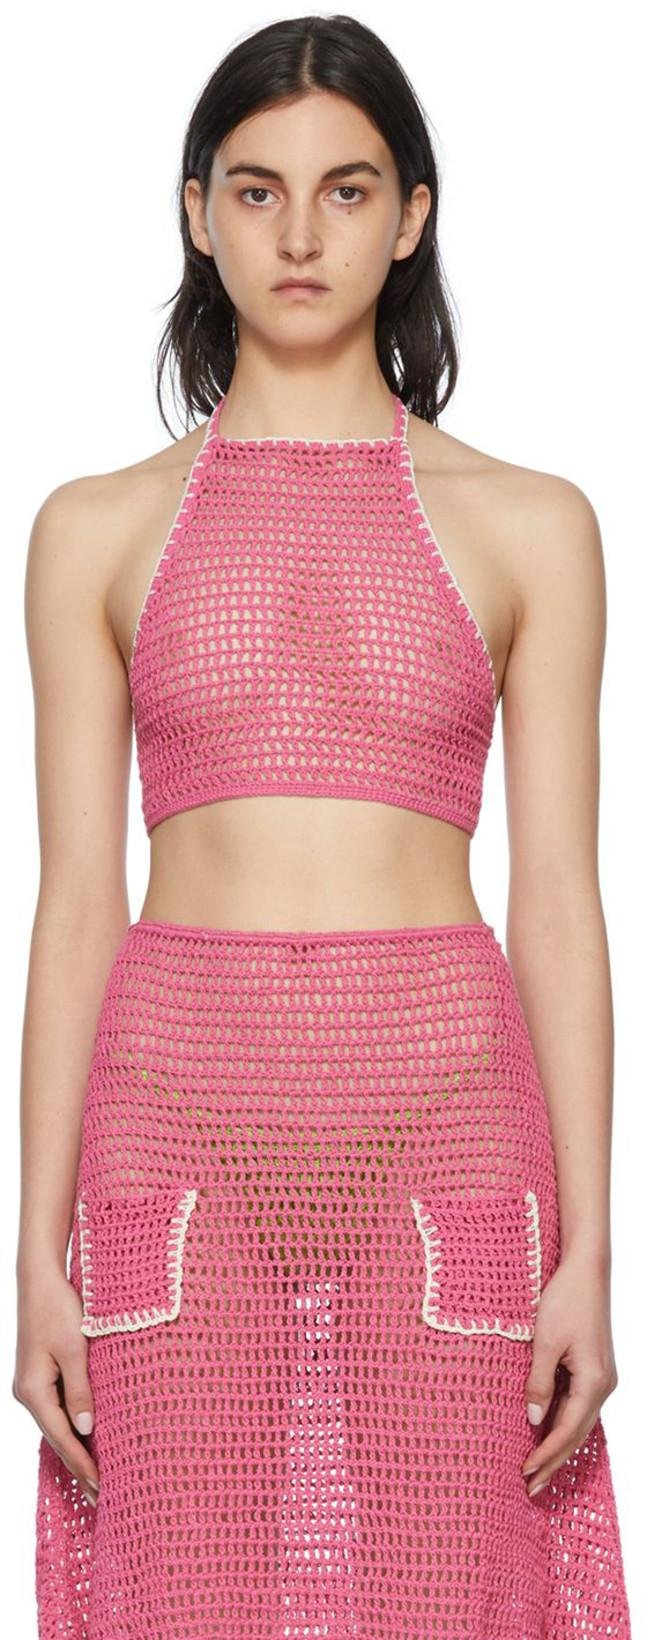 SSENSE Exclusive Pink Camisole by AKOIA